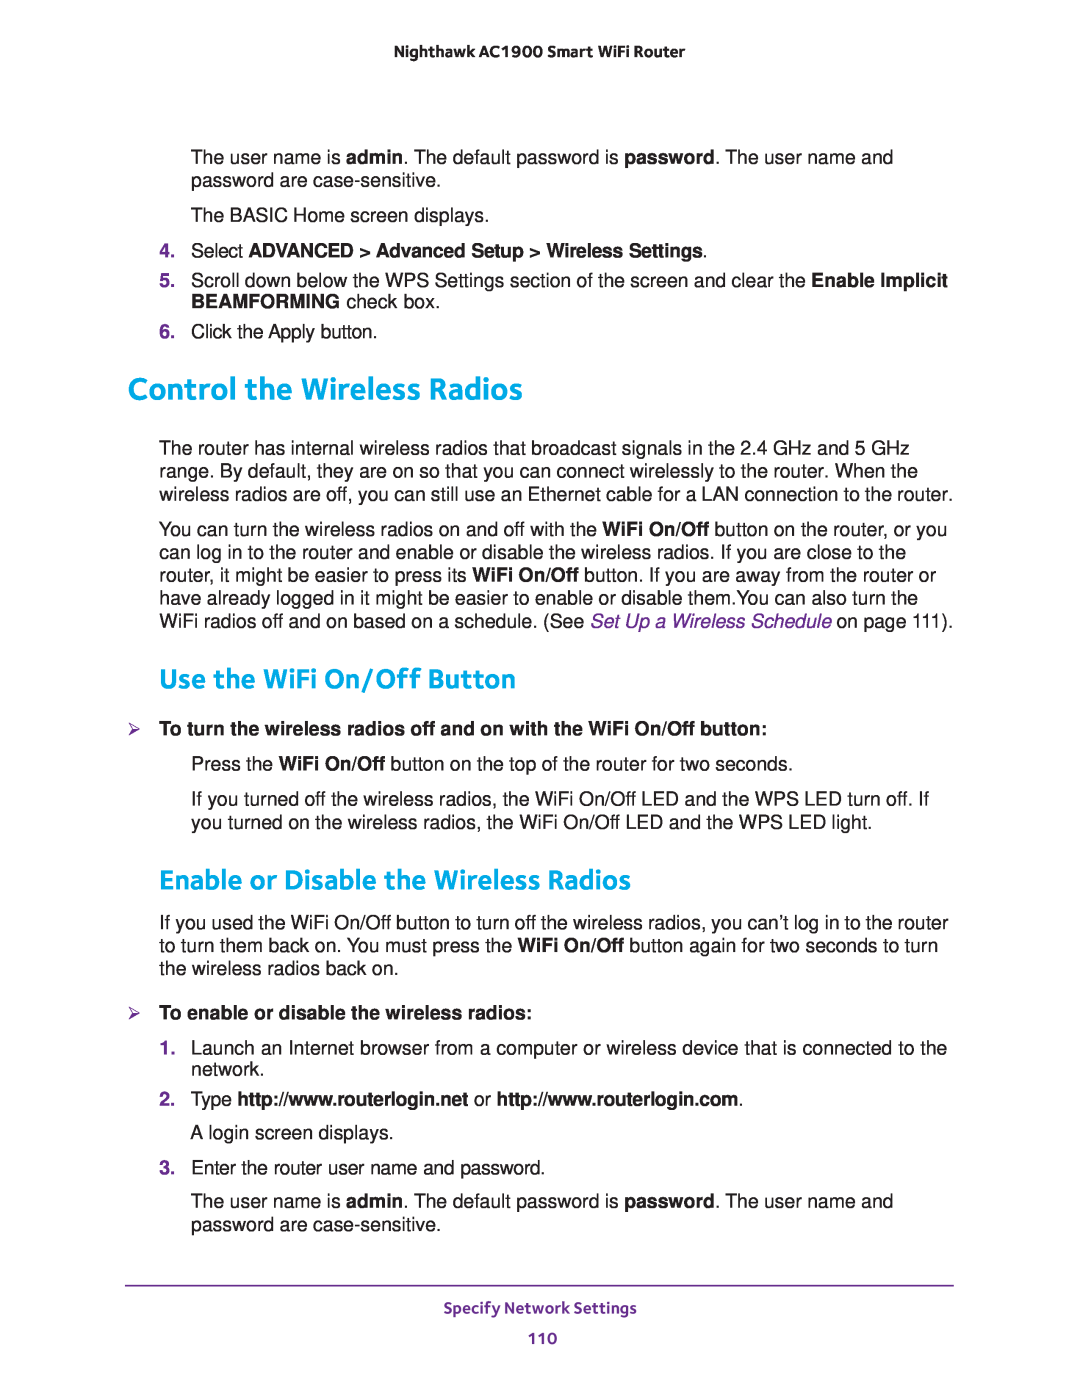 NETGEAR Model R7000 Control the Wireless Radios, Use the WiFi On/Off Button, Enable or Disable the Wireless Radios 